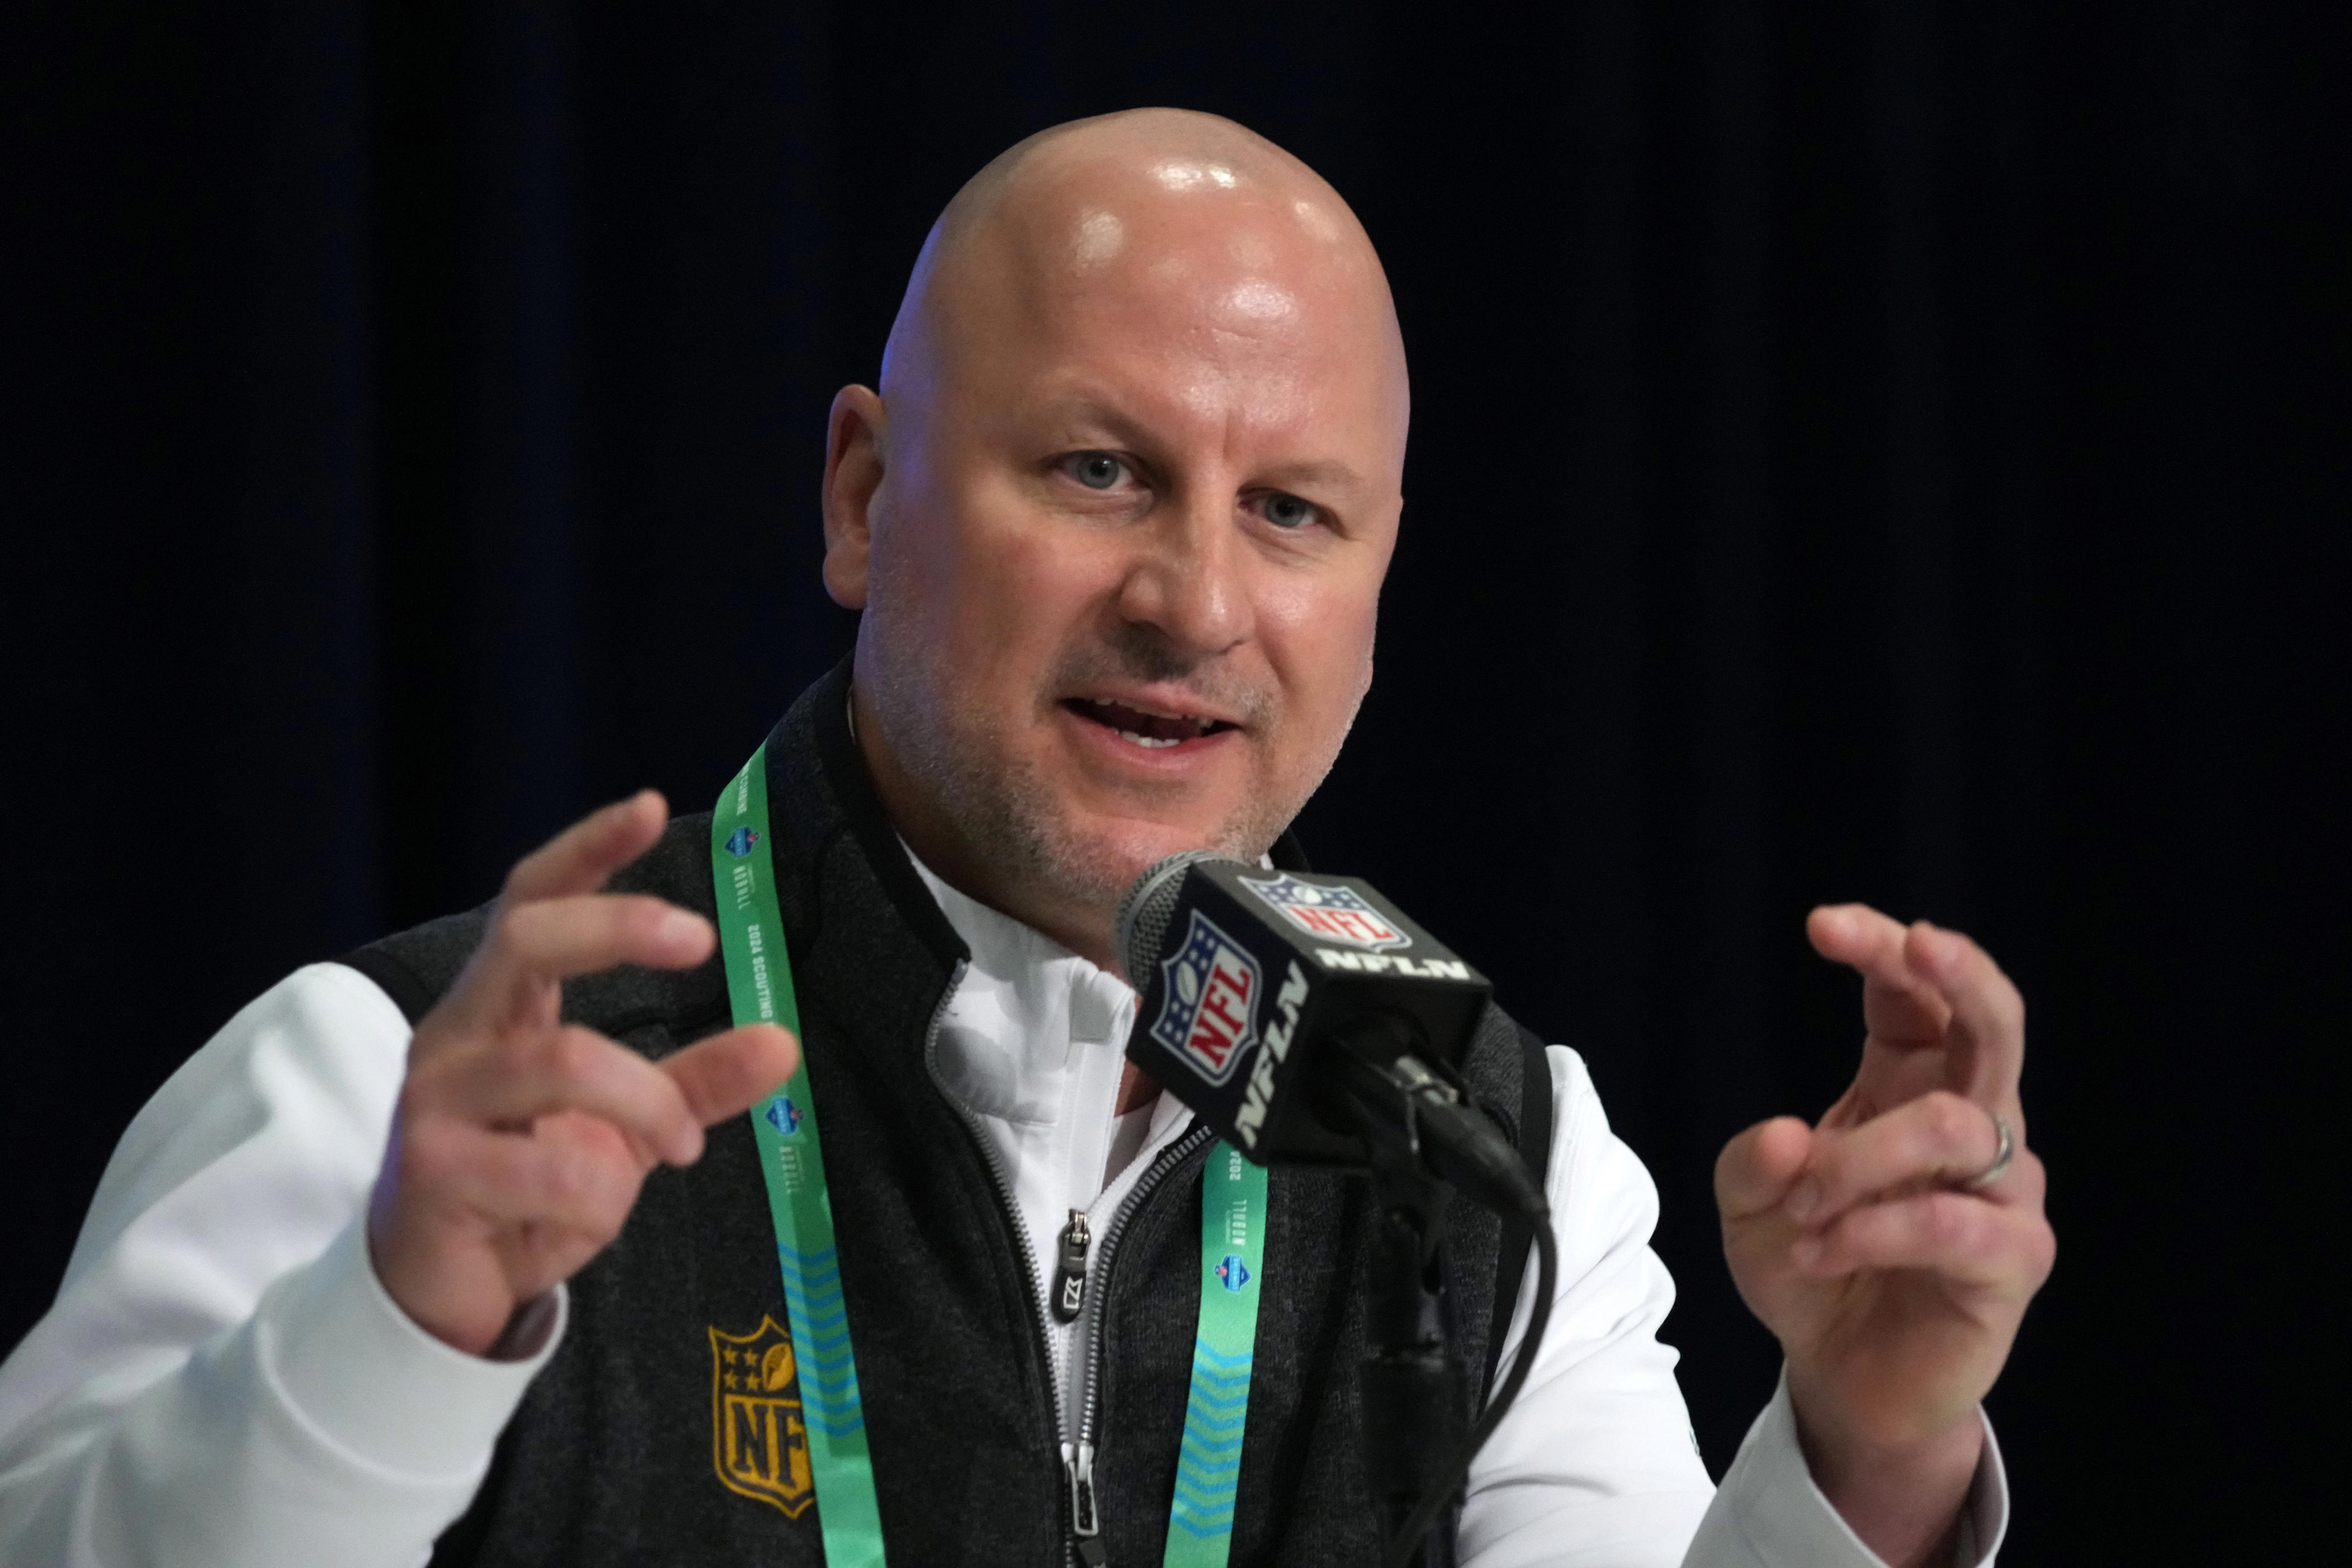 takeaways from chargers gm joe hortiz's pre-draft press conference